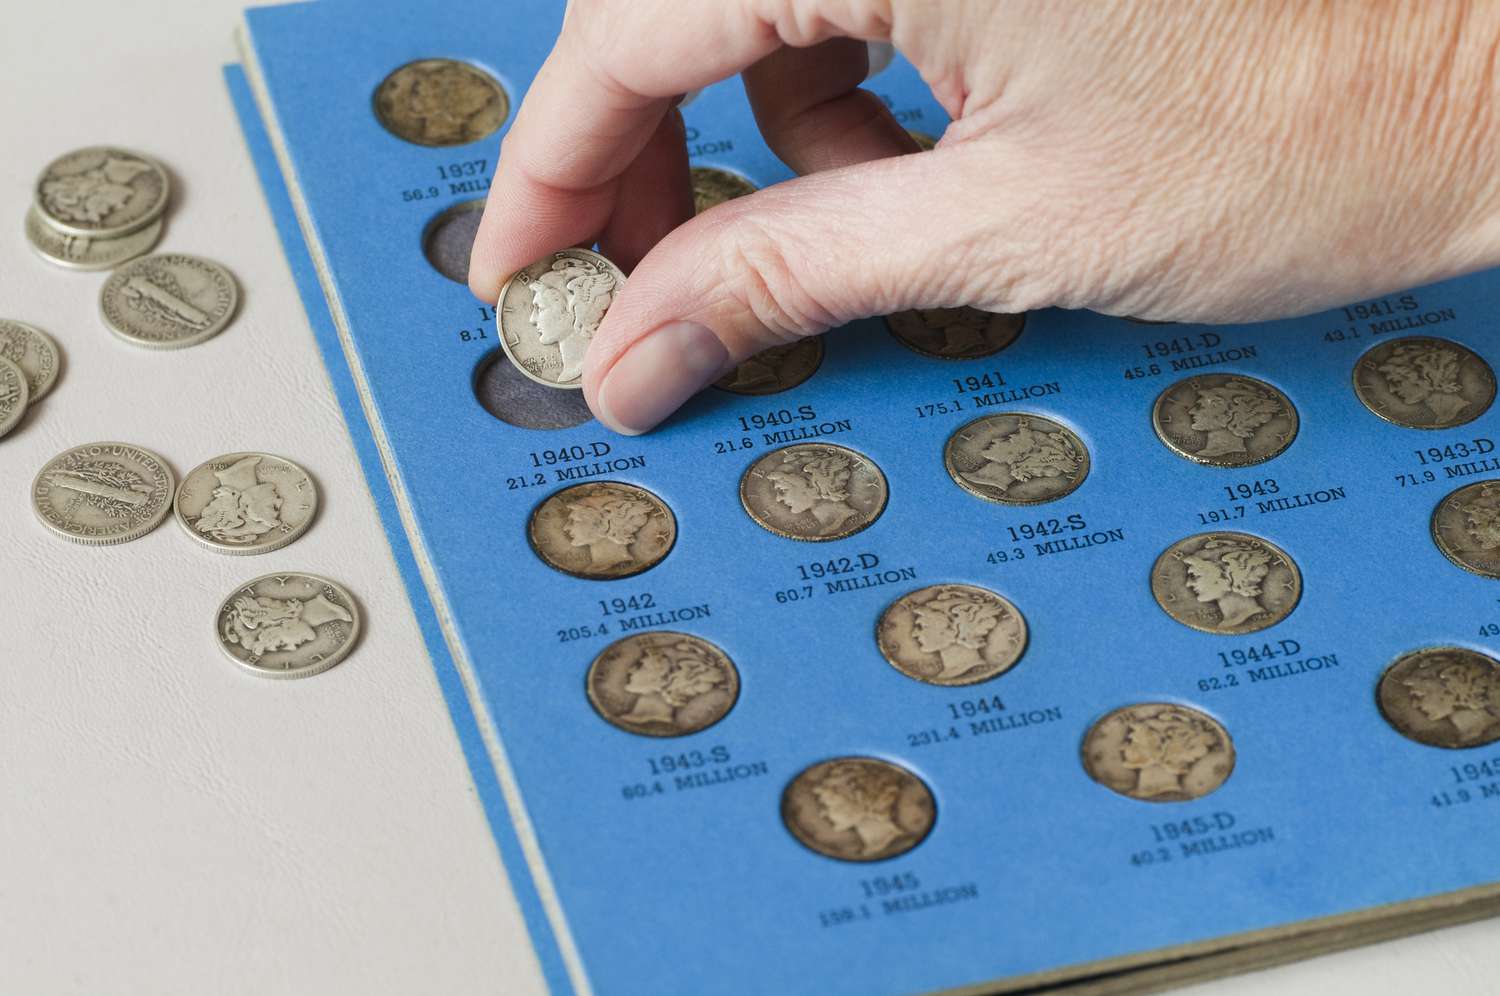 19-captivating-facts-about-coin-collecting